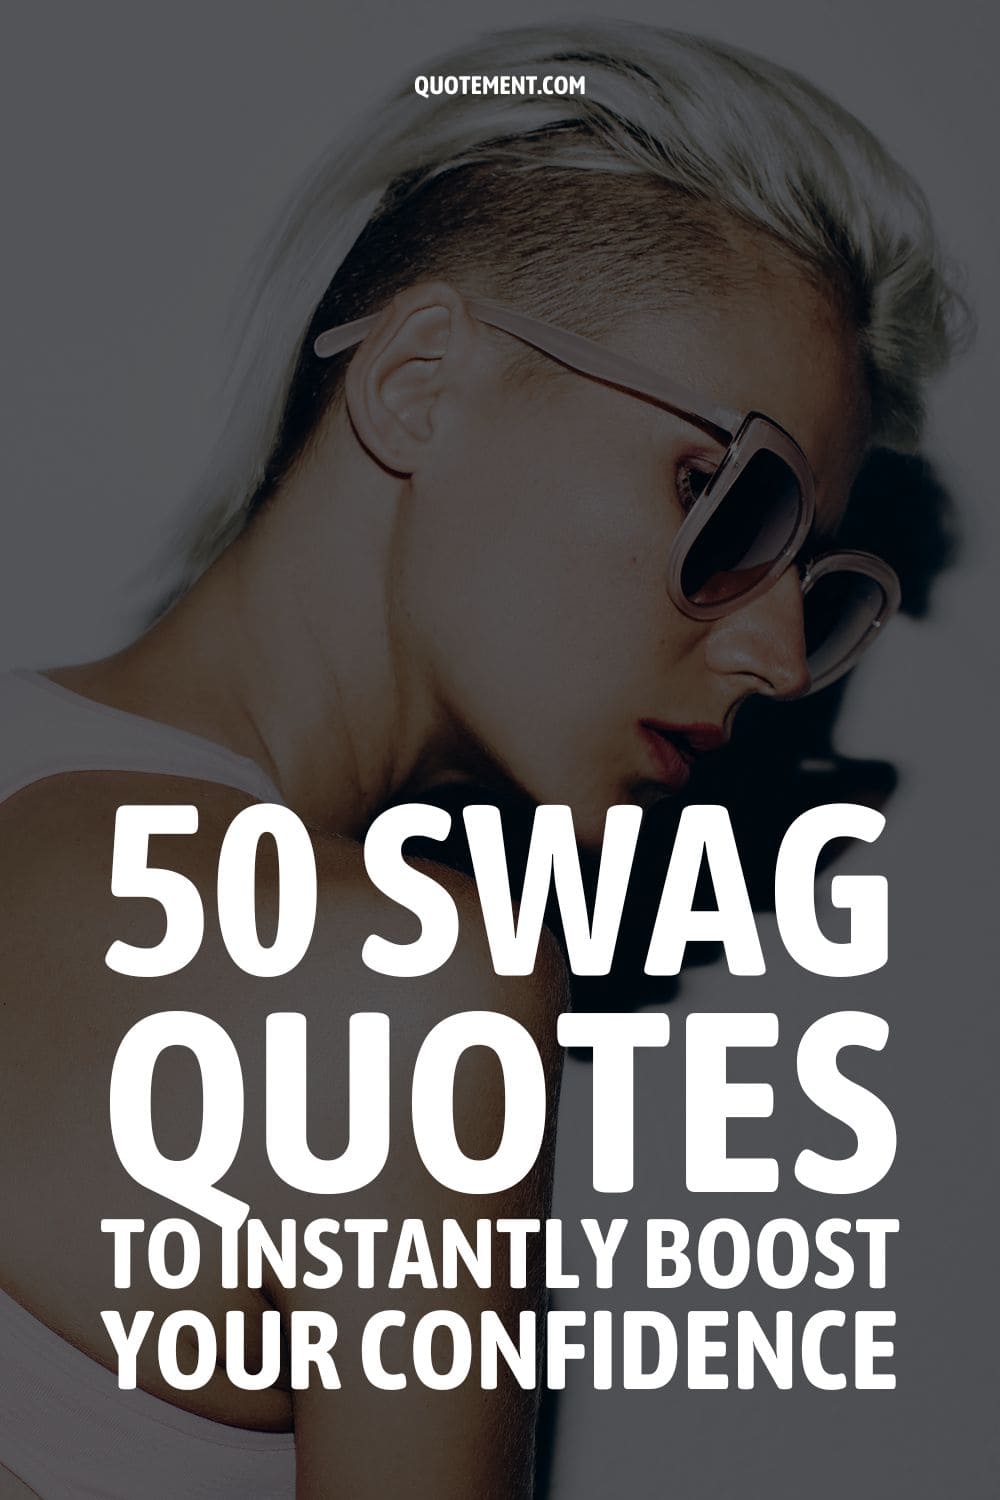 50 Swag Quotes To Instantly Boost Your Confidence
